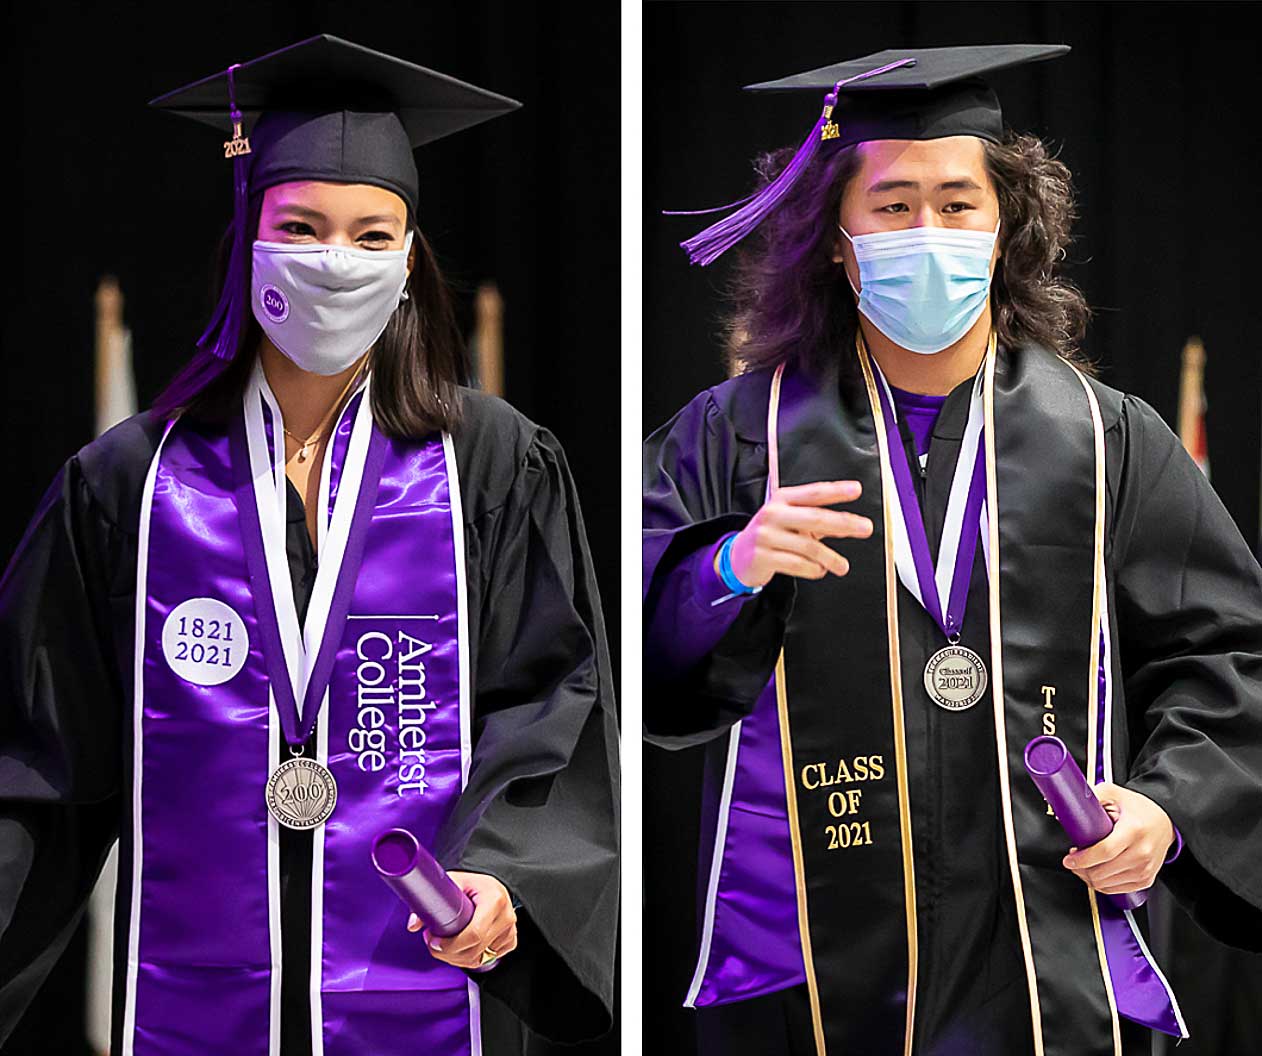 Two graduates exiting the stage after getting their diplomas